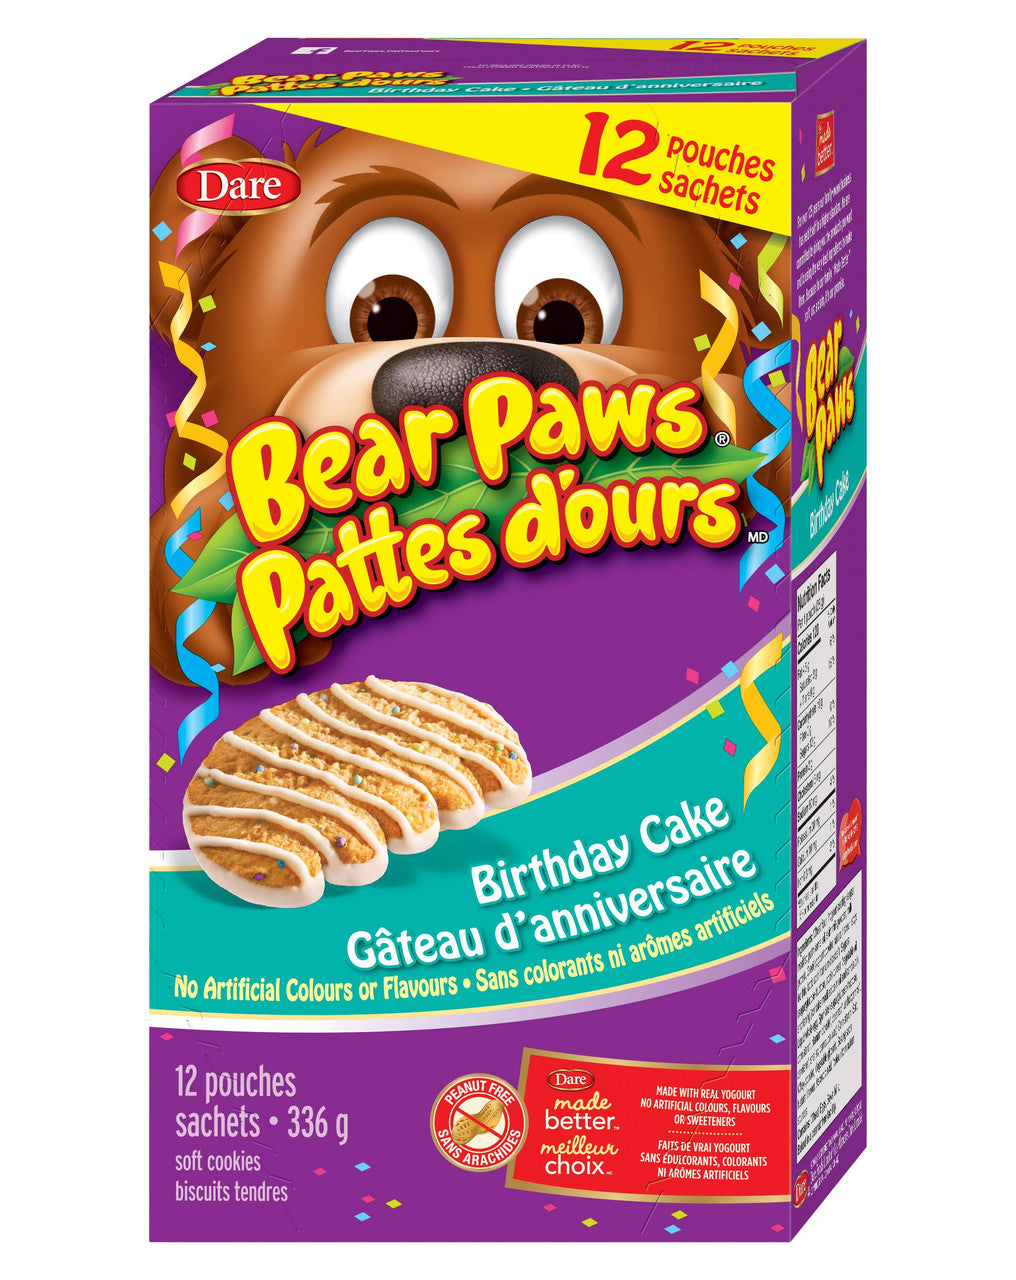 Dare Bear Paws Birthday Cake Cookies, 336g/11.9 oz, 12 Pouches, 1 Box {Imported from Canada}